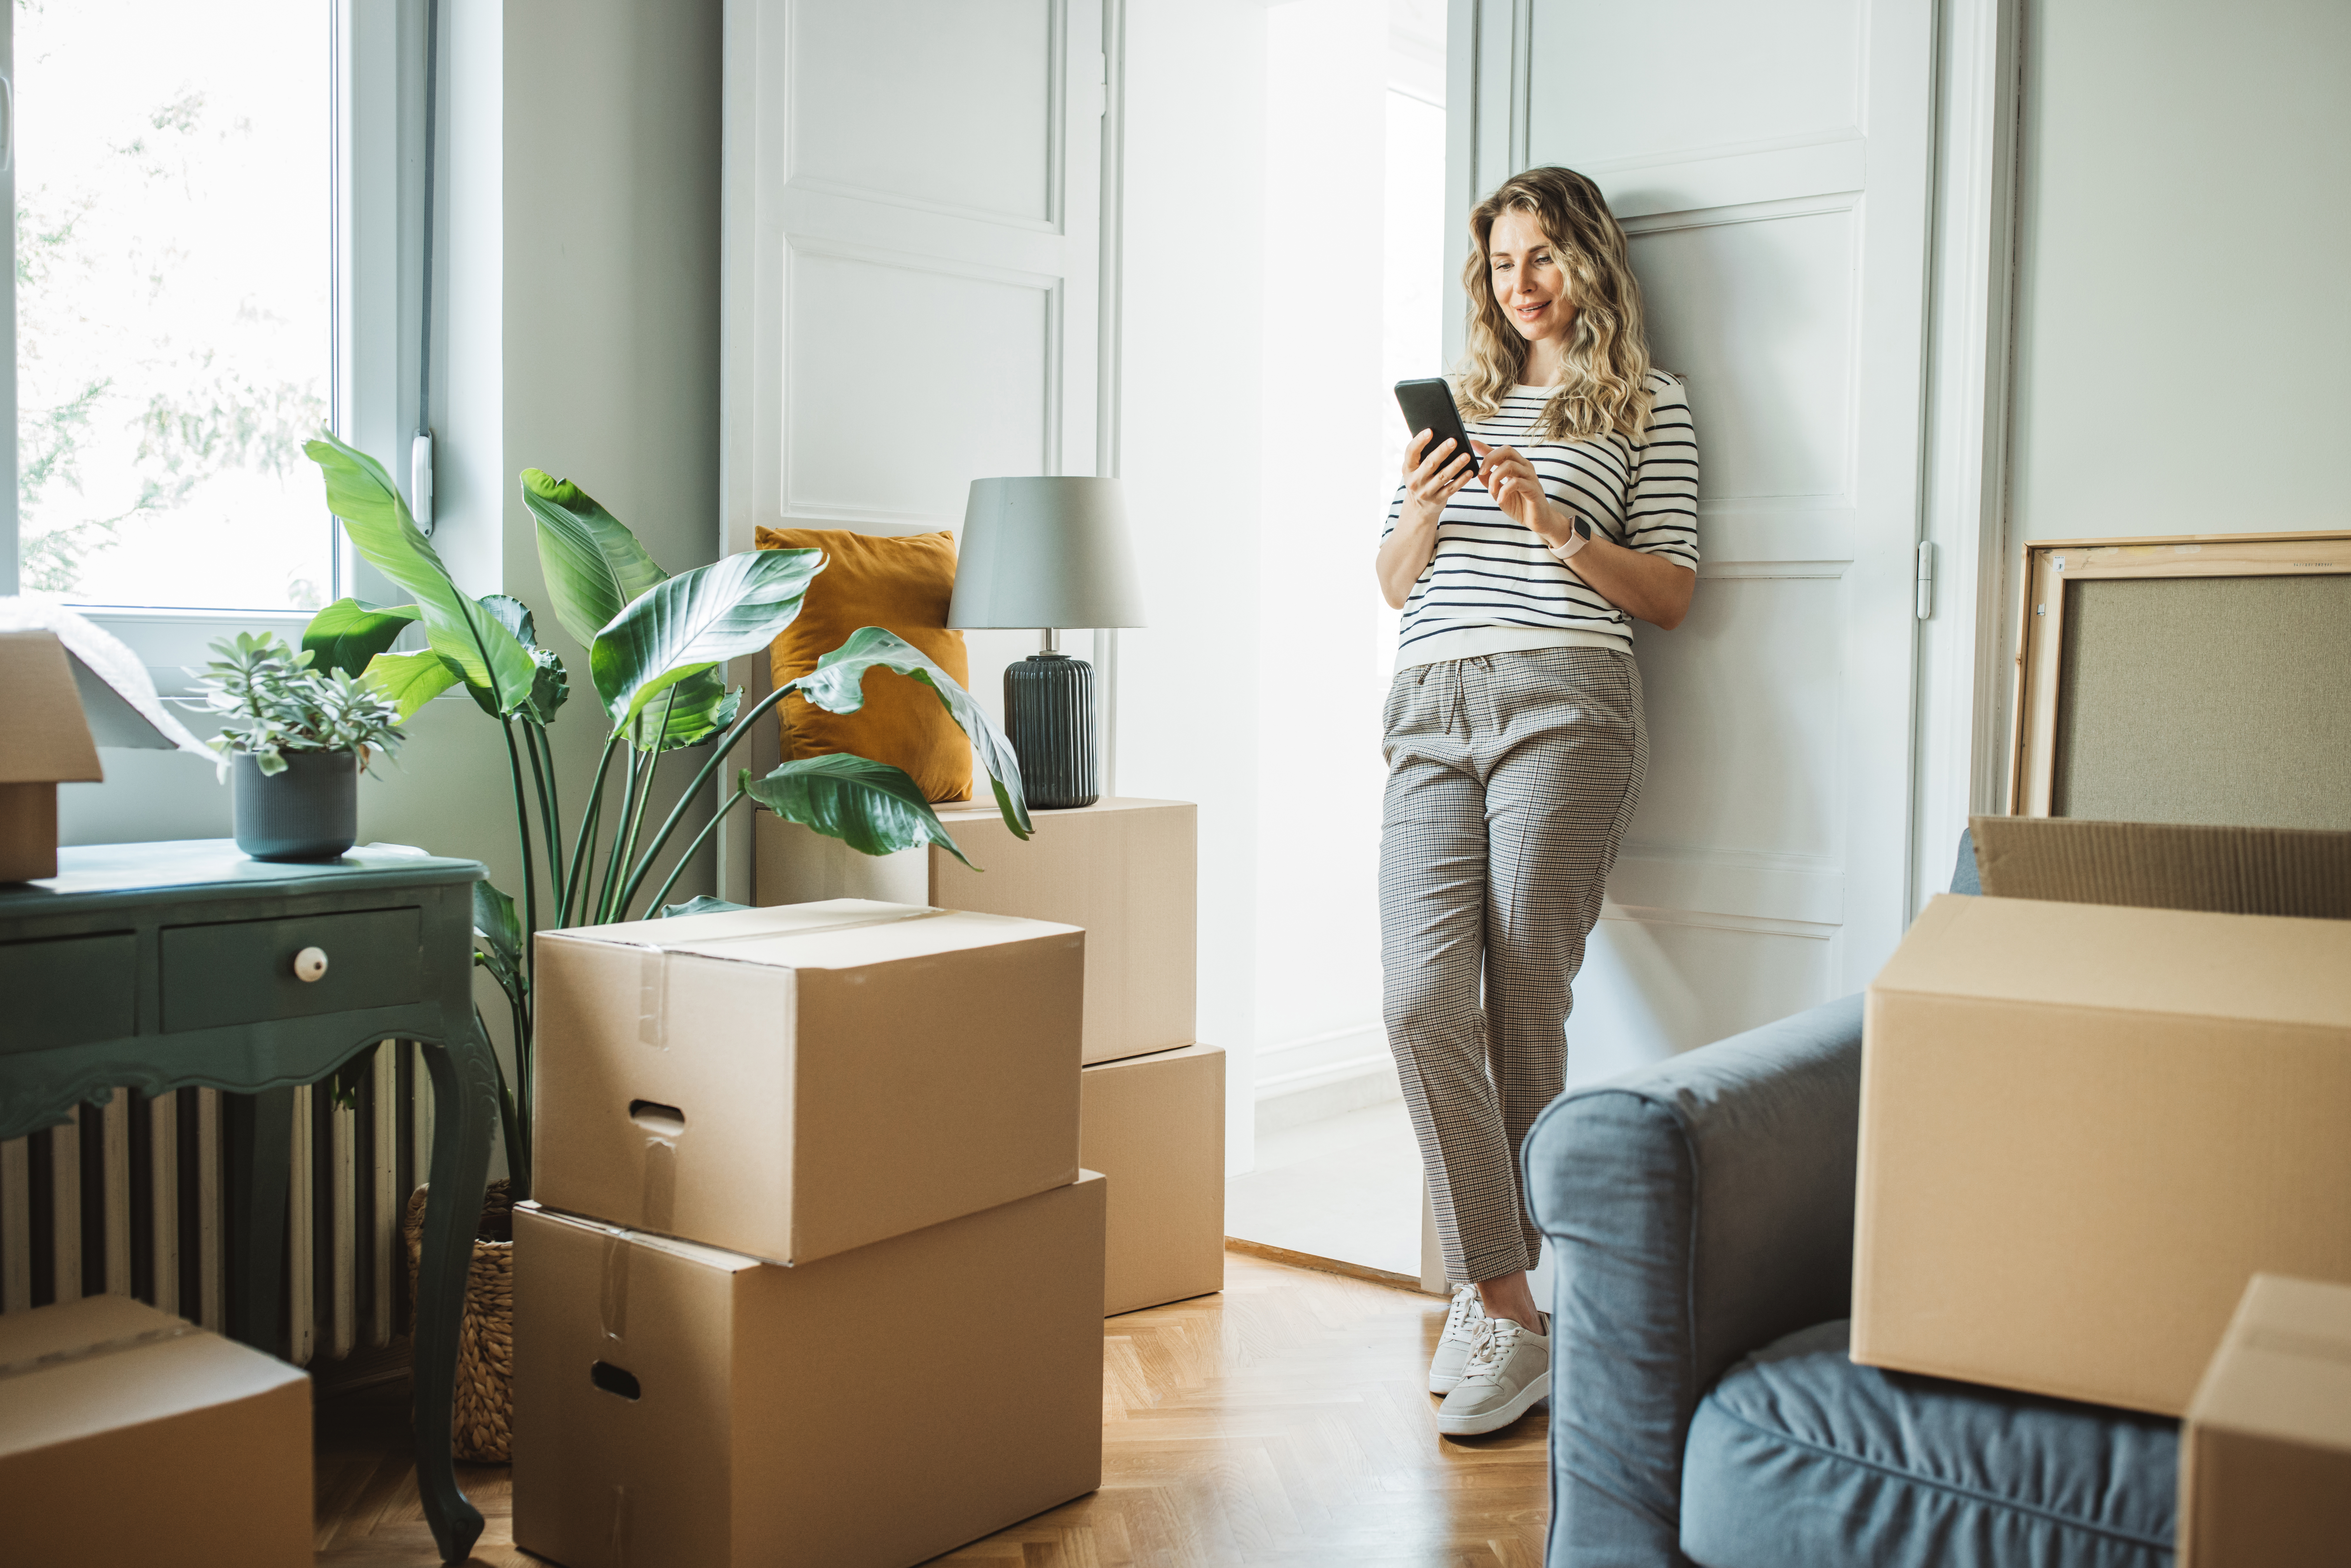 Woman scrolling through phone and unpacking boxes